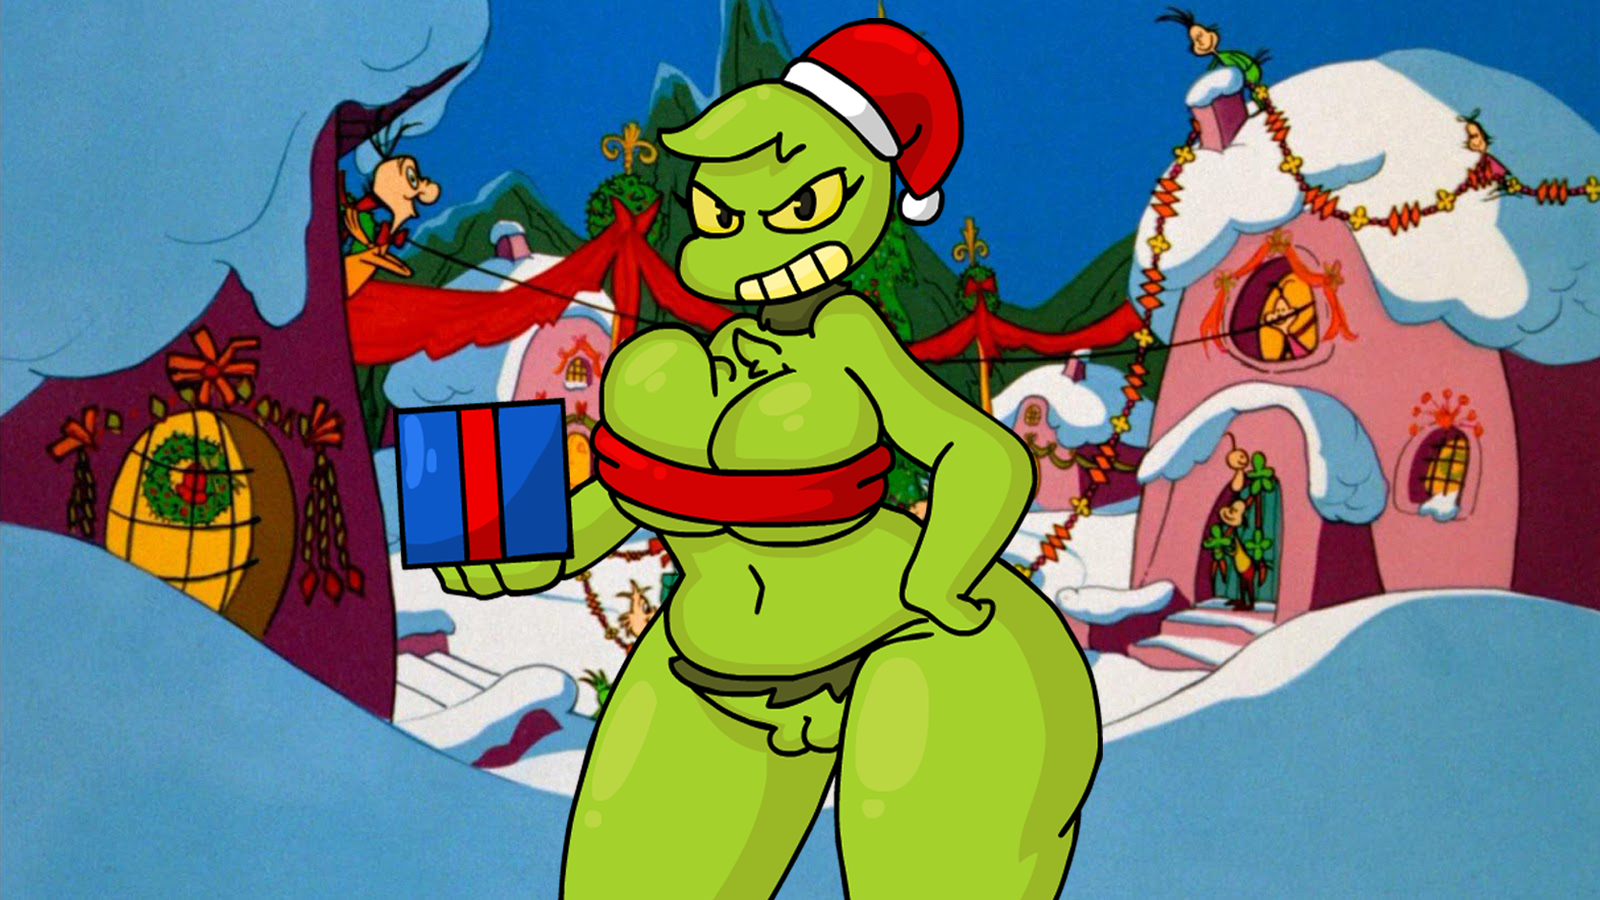 Pepe The Grinch nude pic, sex photos Pepe The Grinch, detnox e. Sex Pepe Th...